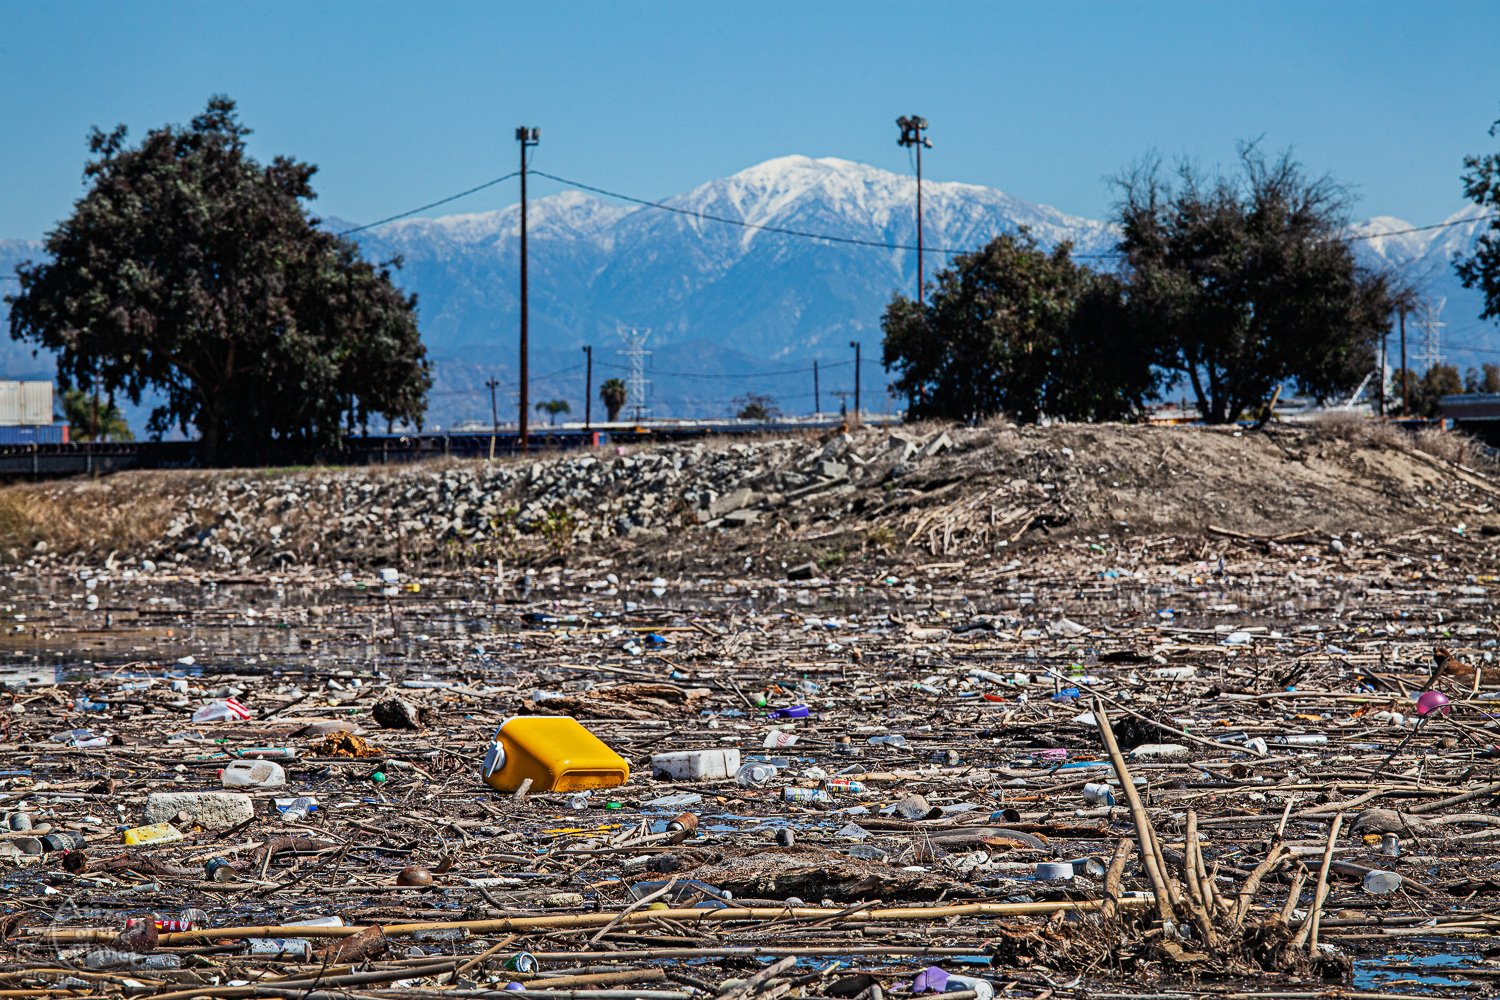  Accumulated trash next to the headworks for the Rio Hondo Spreading Grounds,  Pico Rivera. 